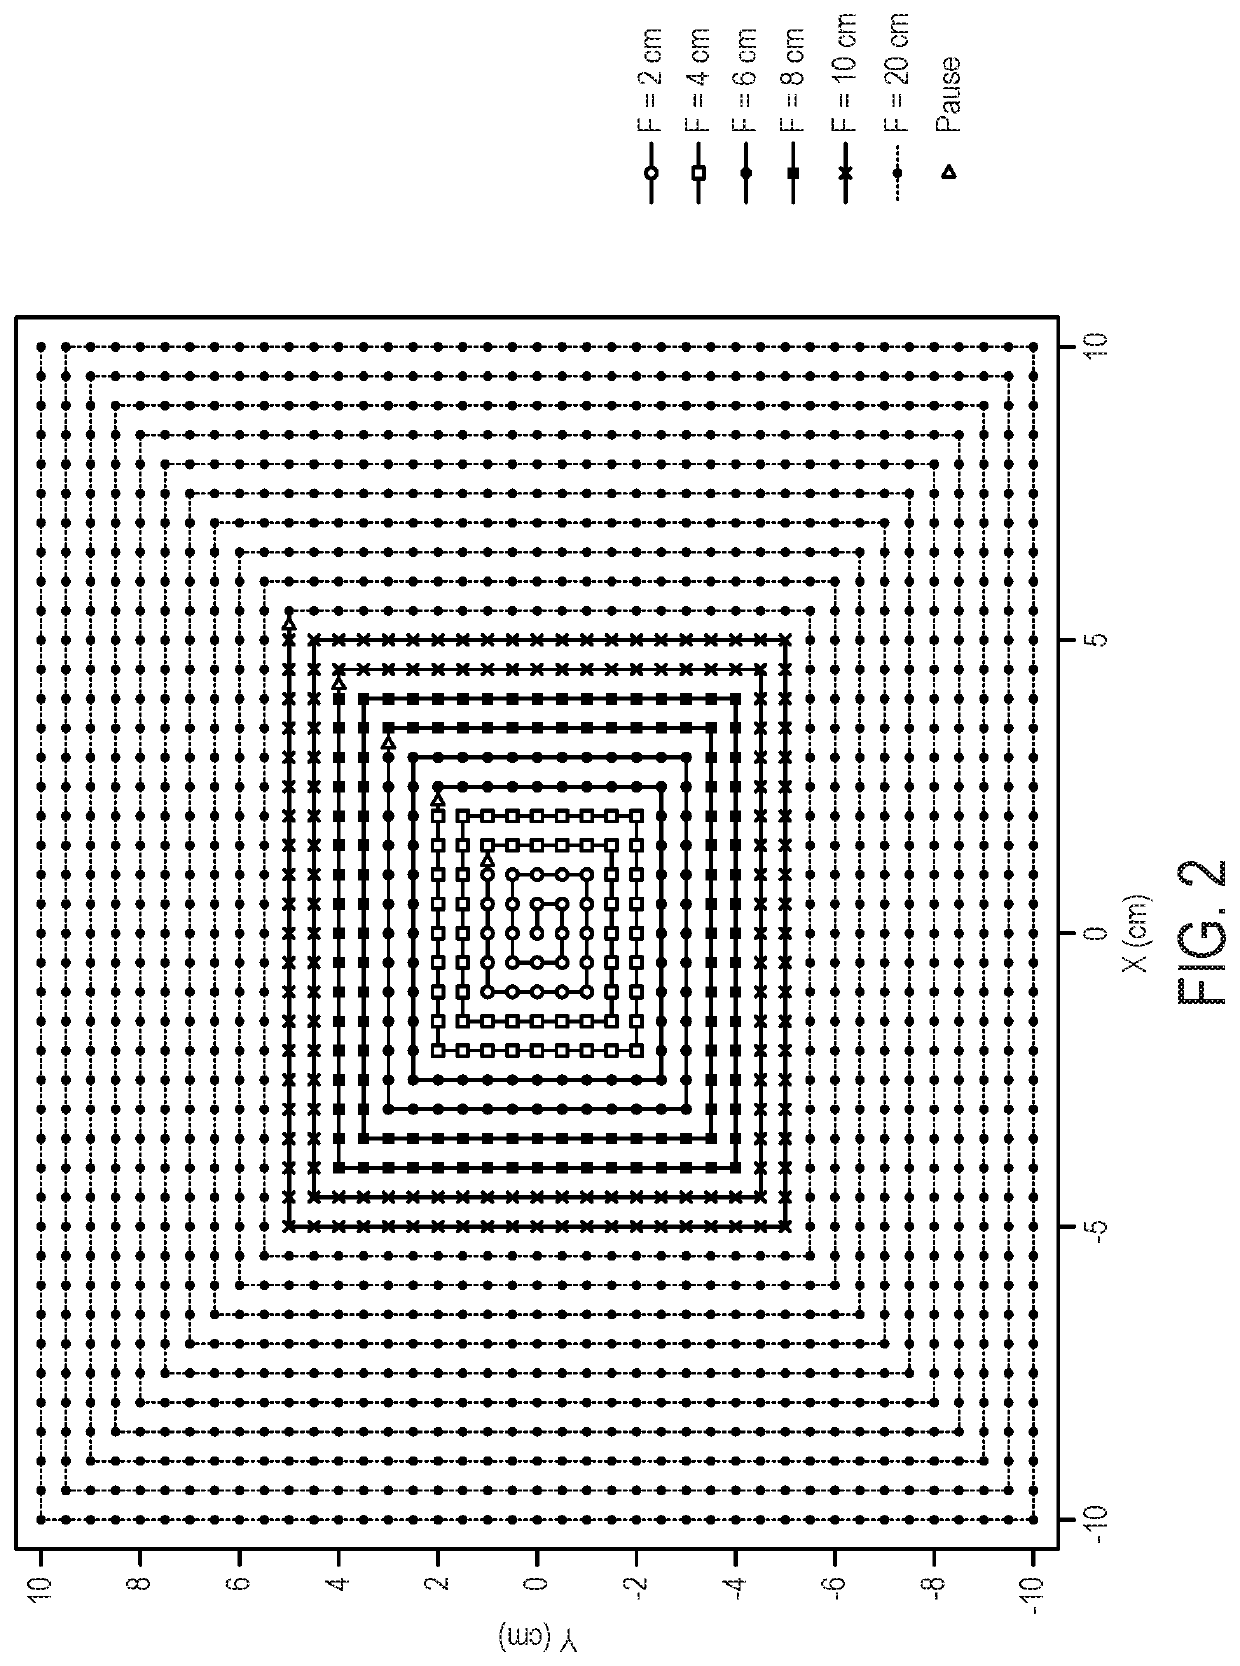 Method for measuring field size factor for radiation treatment planning using proton pencil beam scanning